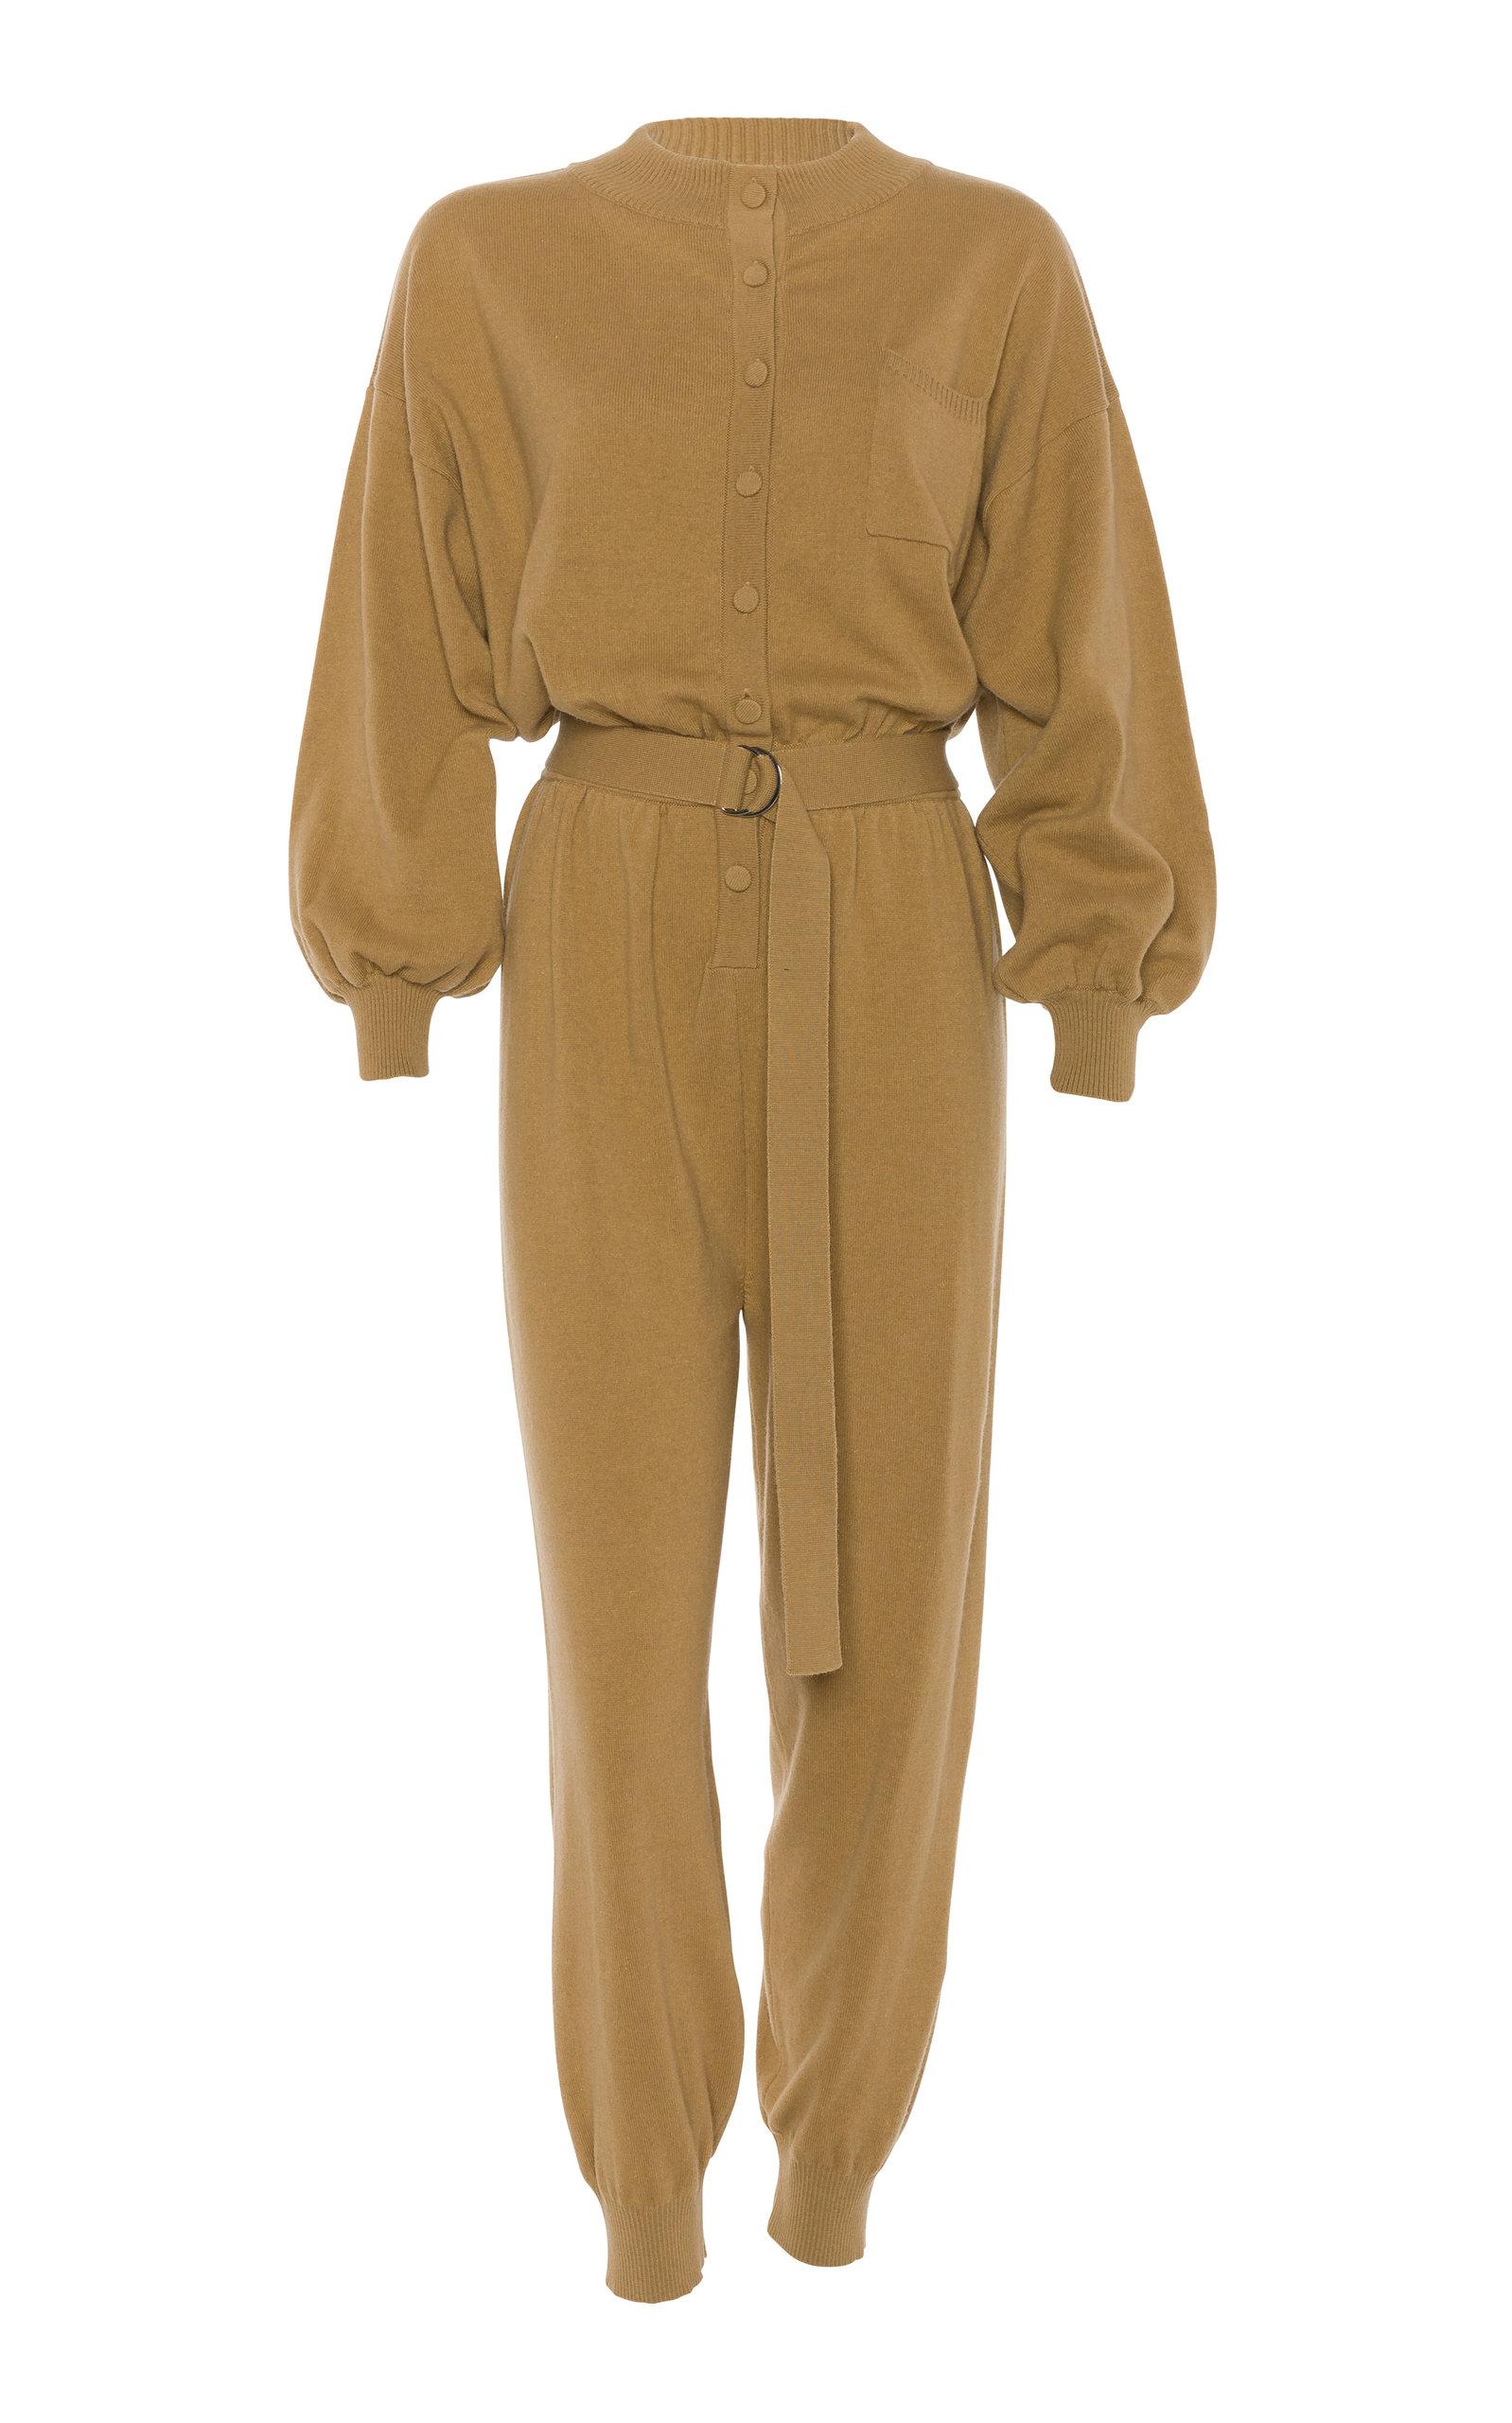 CORDOVA Corvara Belted Wool-blend Jumpsuit in Natural - Lyst